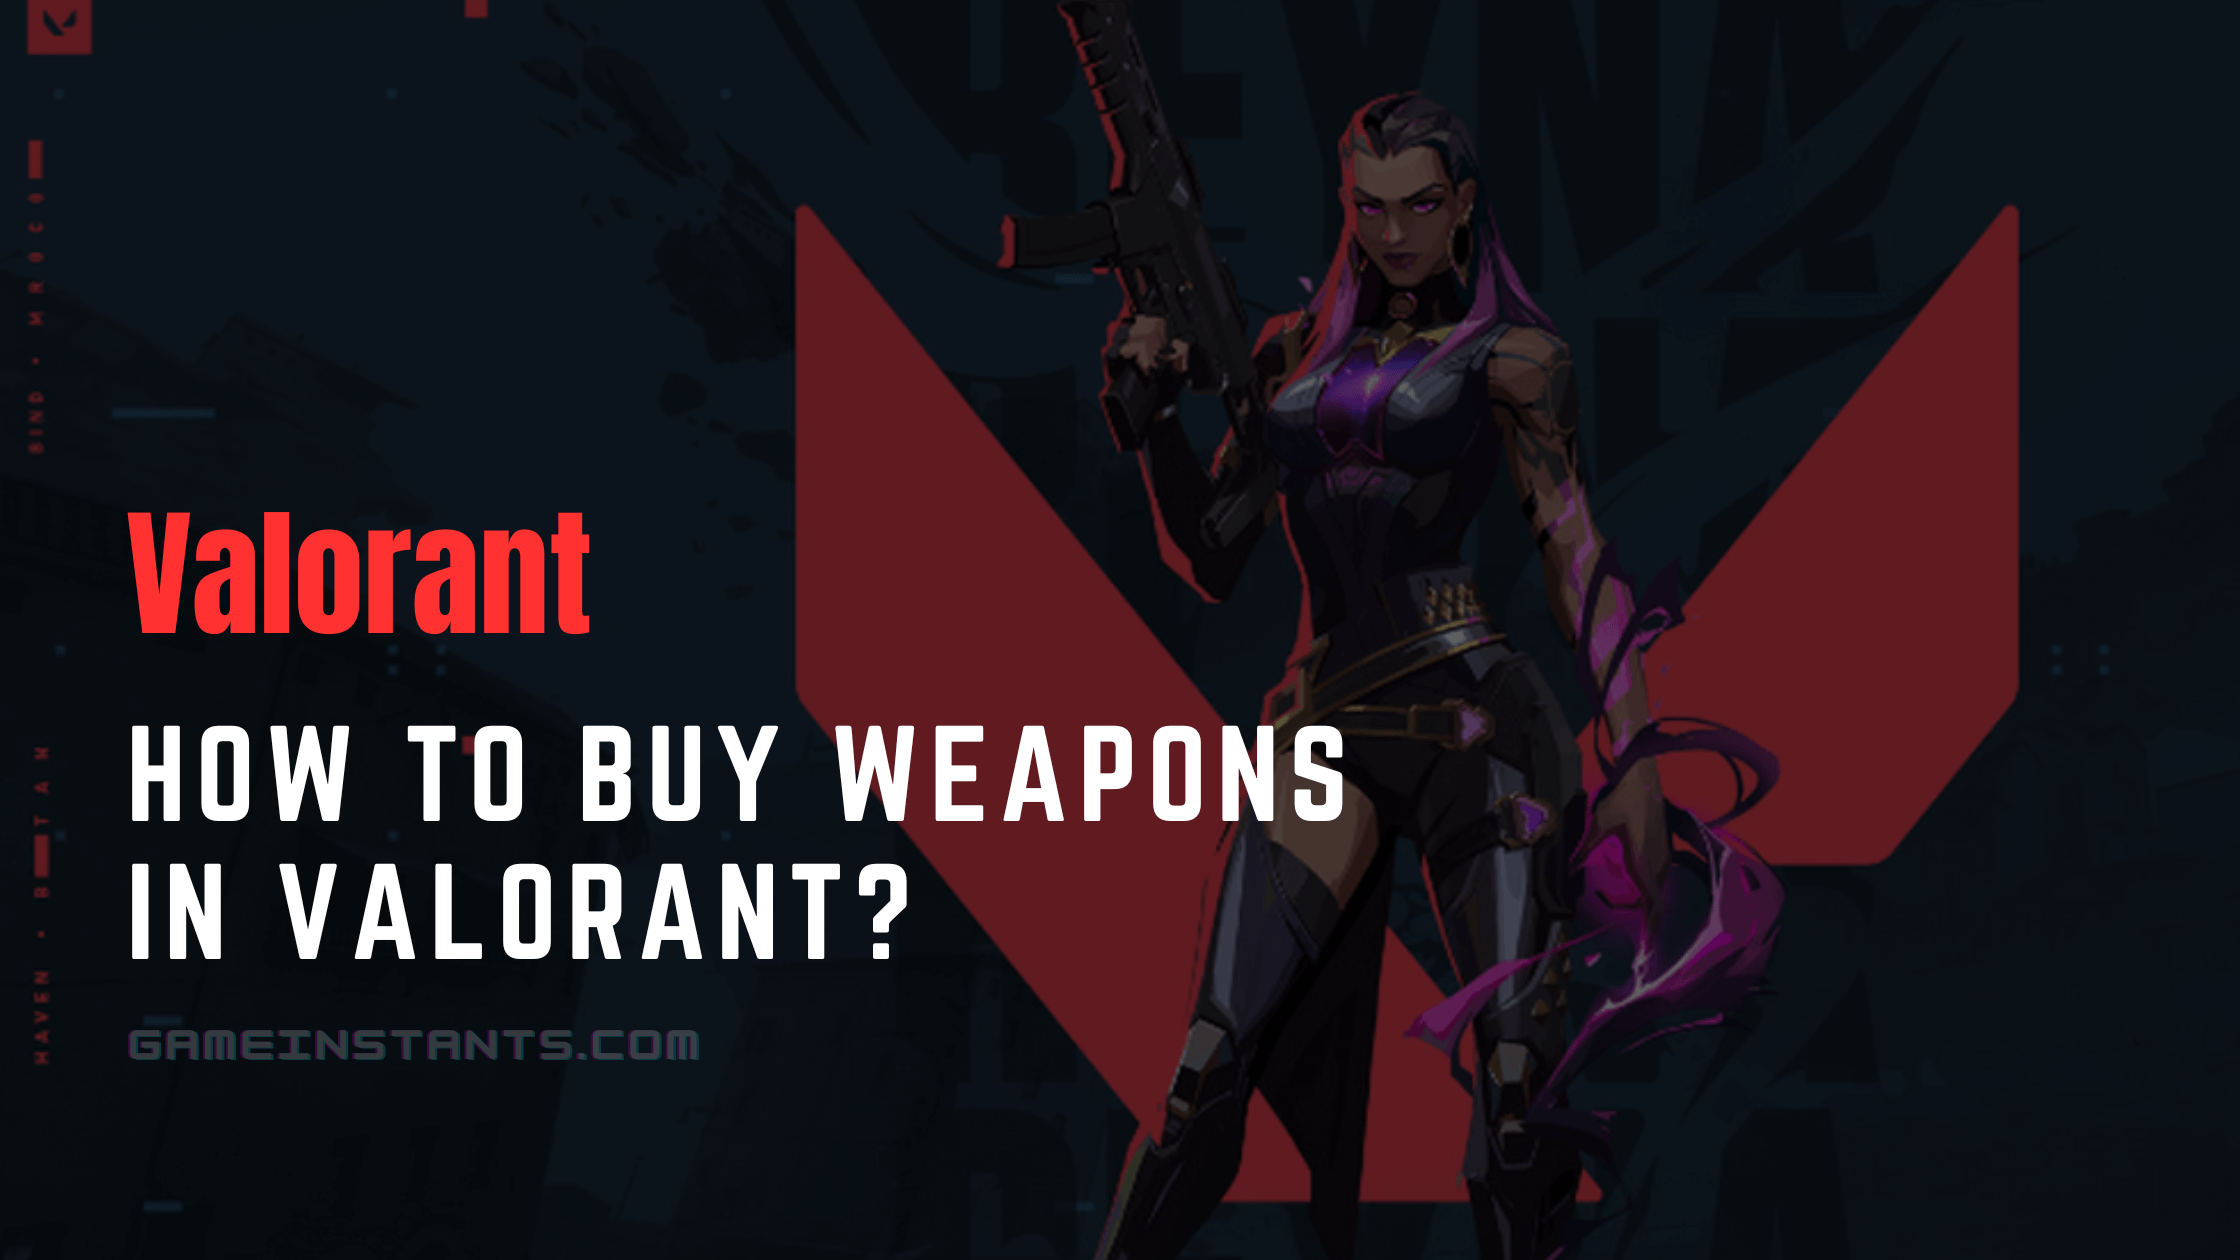 How To Buy Weapons in Valorant